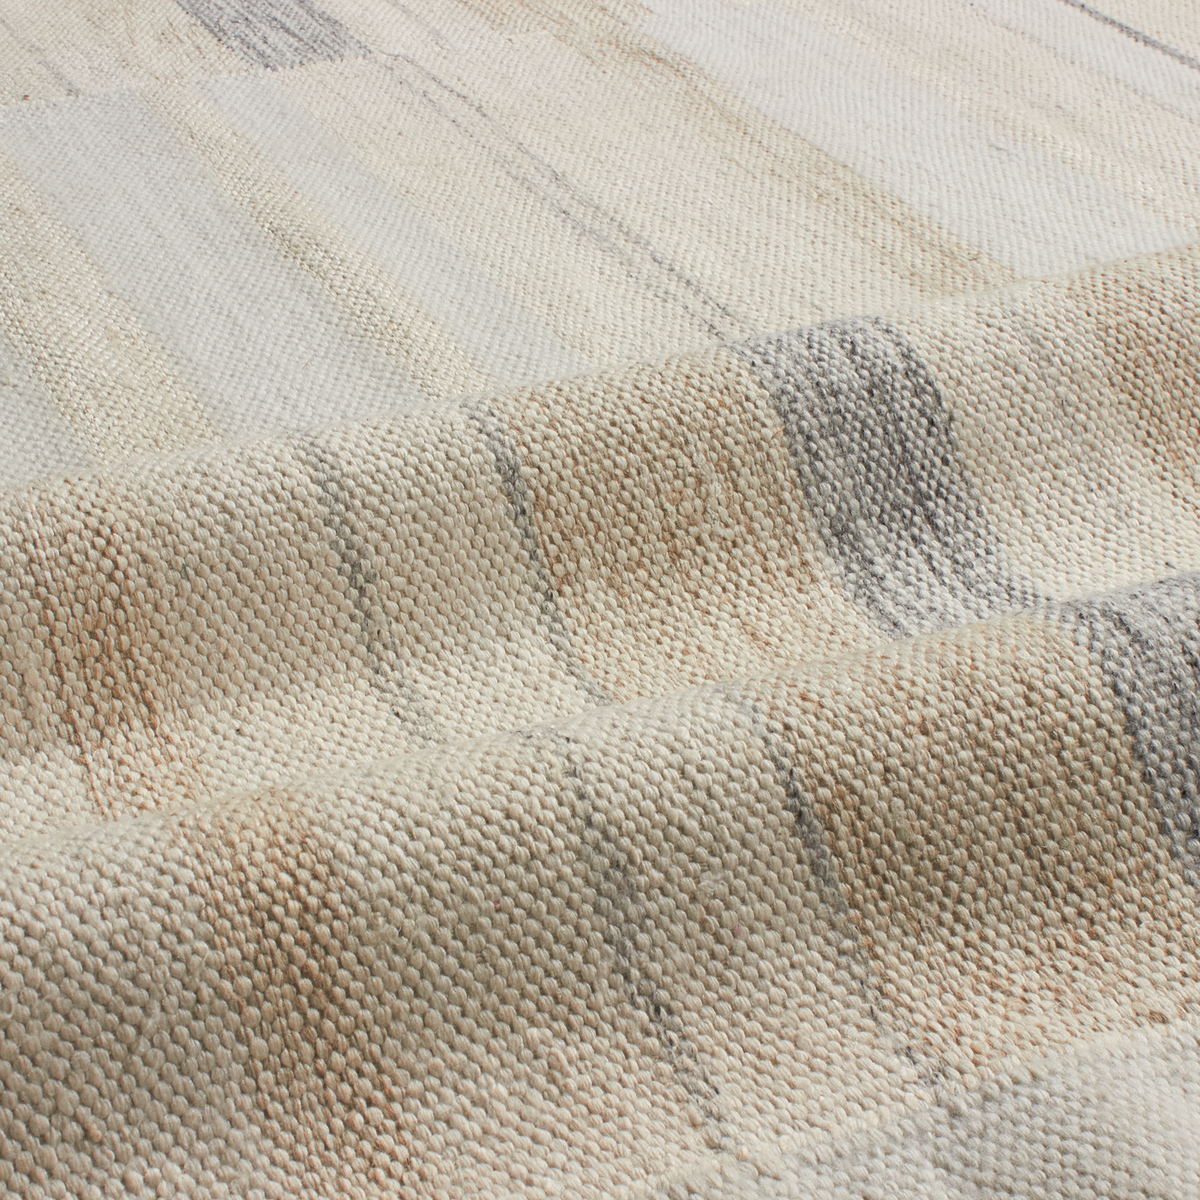 An homage to Scandinavia's long history of rug craftmanship, the Scandinavian Flatweave Collection draws inspiration from mid-century Swedish textiles, uniting traditional techniqu